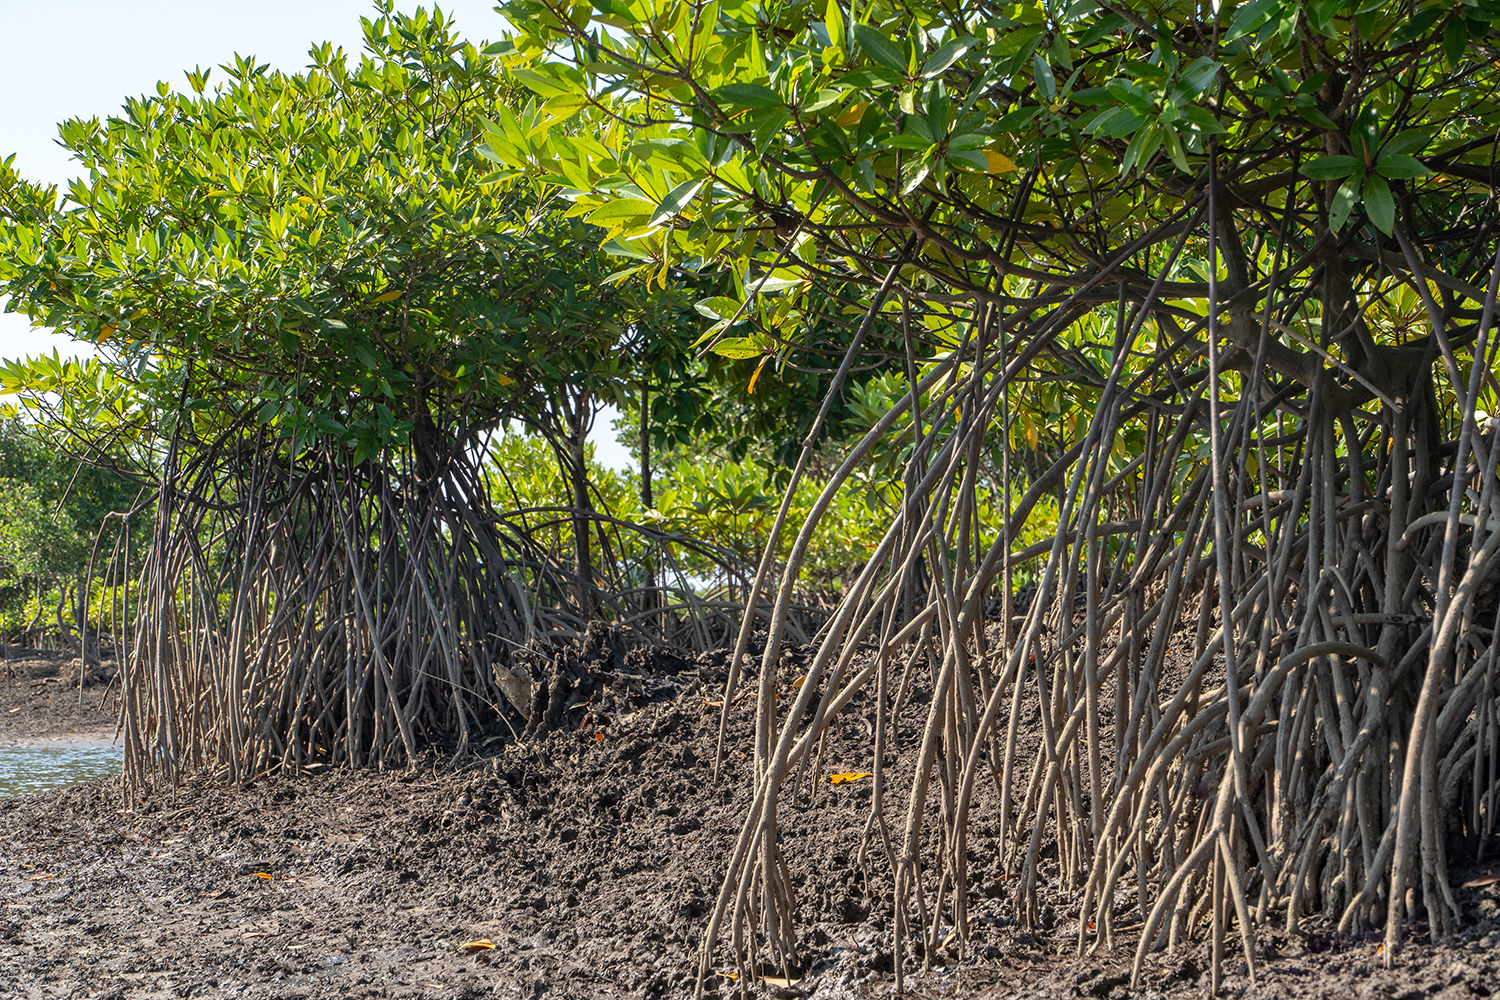 Mangroves With Their Complex Root Structure Which Sequesters CO2 Deeply Back Into The Ground. Photograph by Trevor Tunnington.